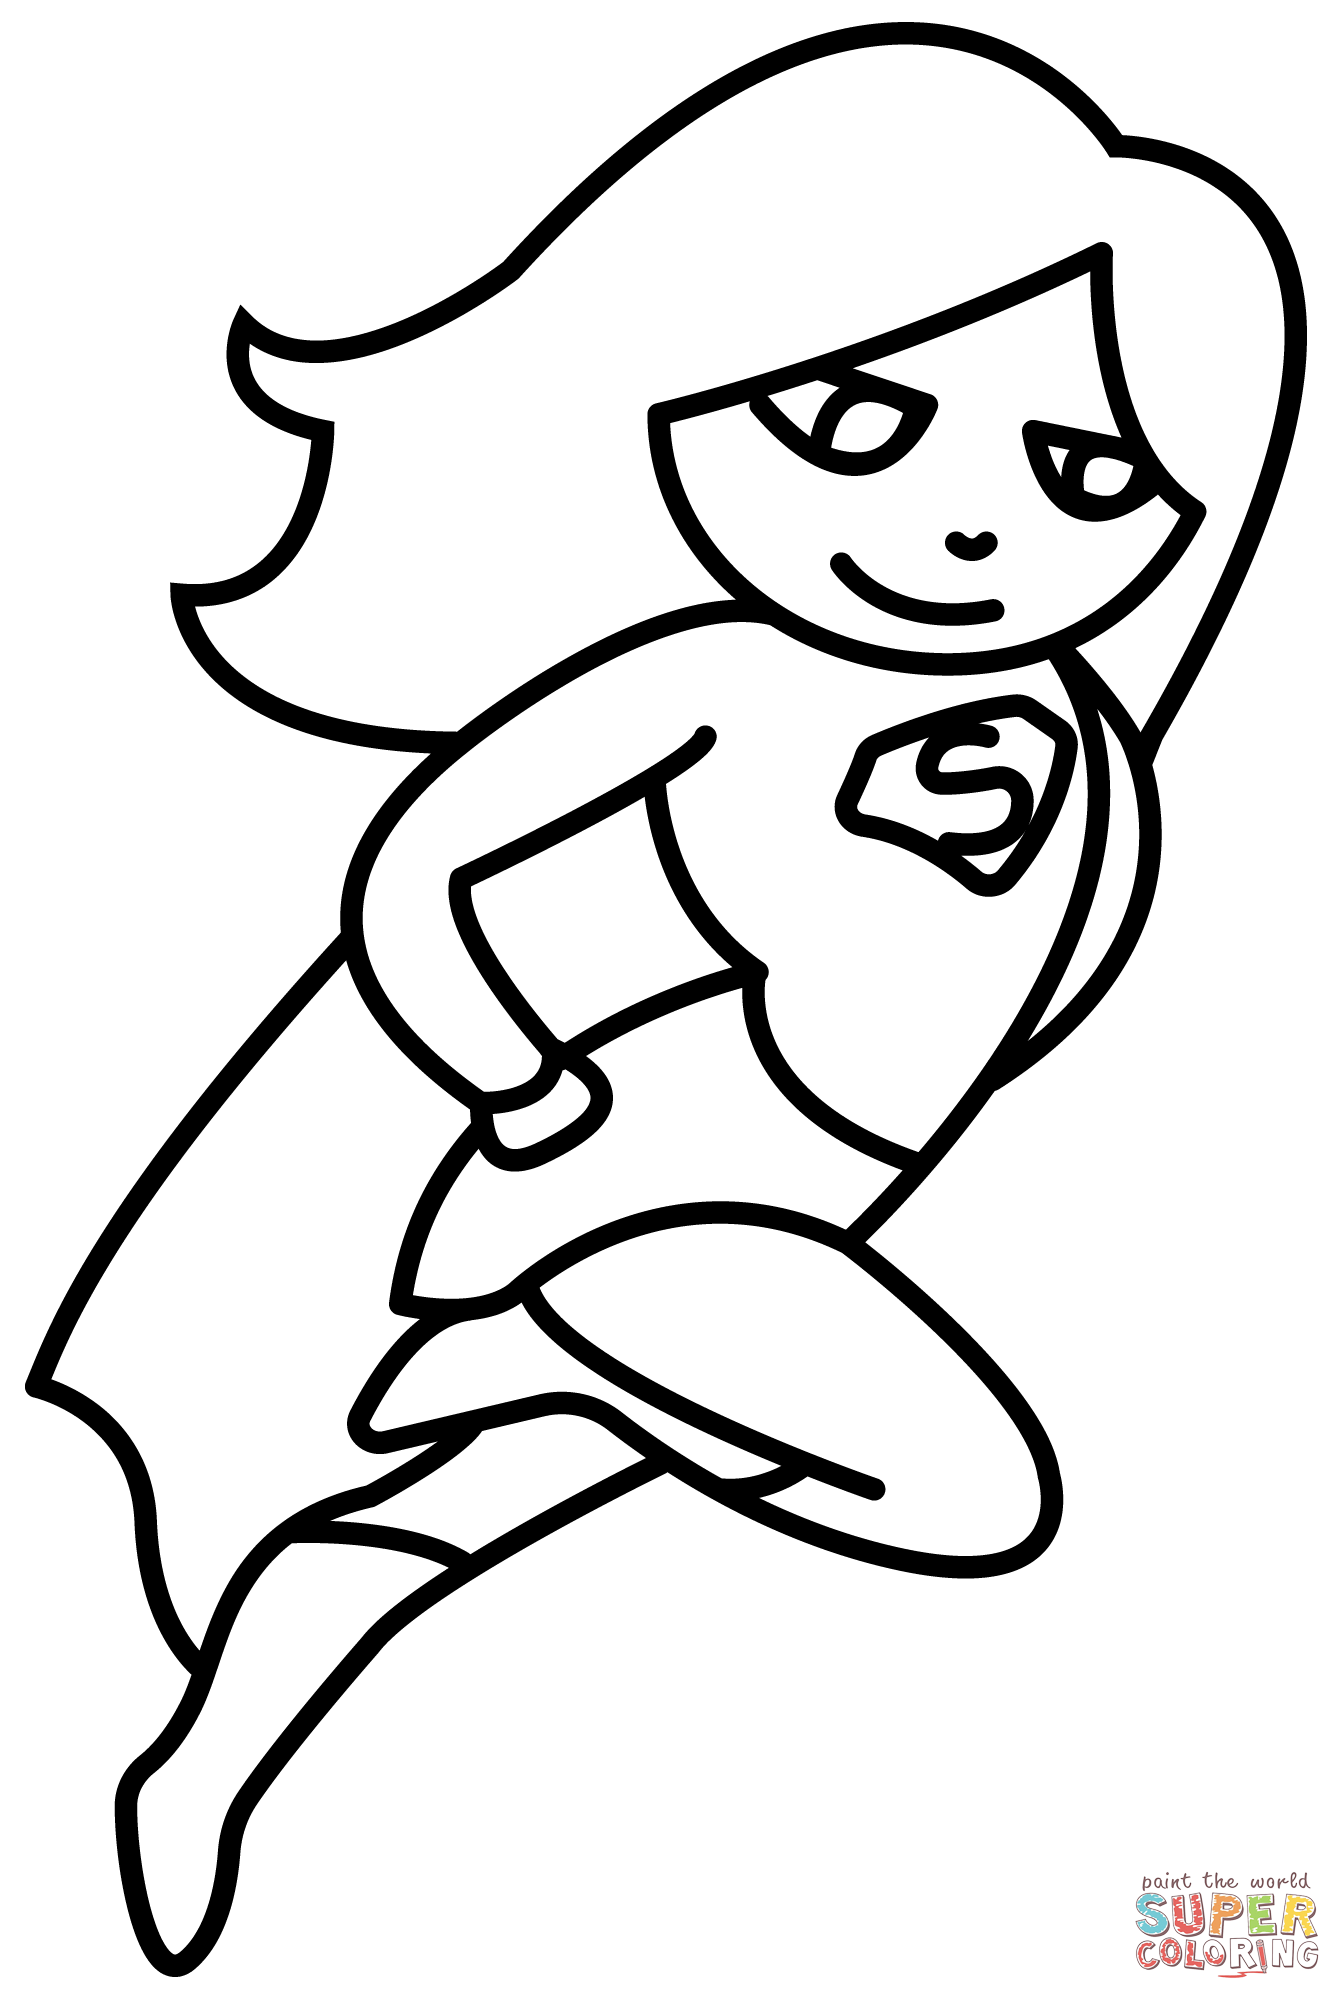 Chibi supergirl coloring page free printable coloring pages